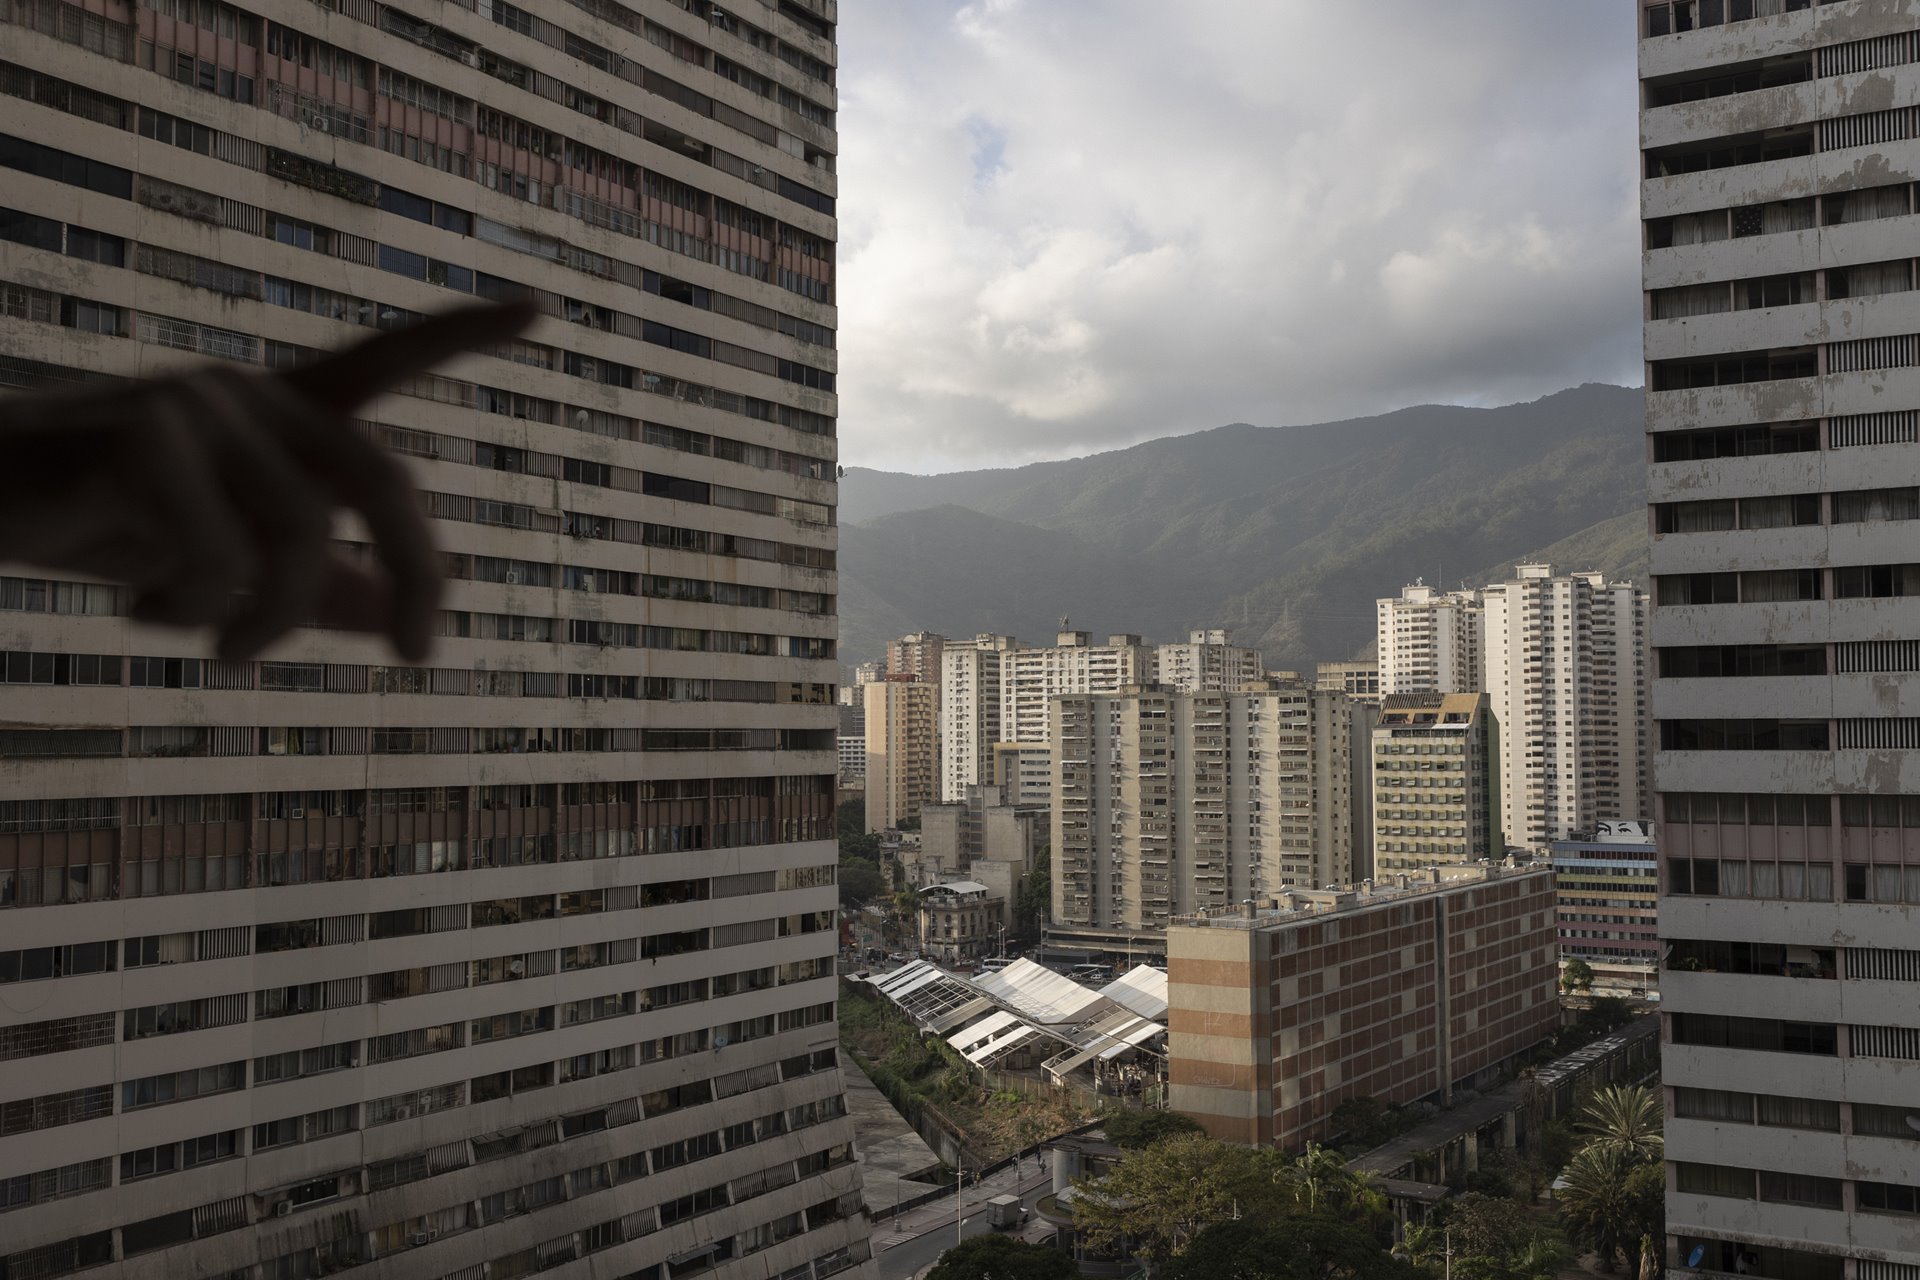 <p>The Twin Towers of Parque Central in Caracas, built in the 1970s, were a prestigious development that until 2003 held the title of tallest skyscrapers in Latin America. Now the buildings leak, are badly maintained, and insecure. In the distance, a mural depicting the eyes of former president, Hugo Chávez, can be seen atop a building.</p>
